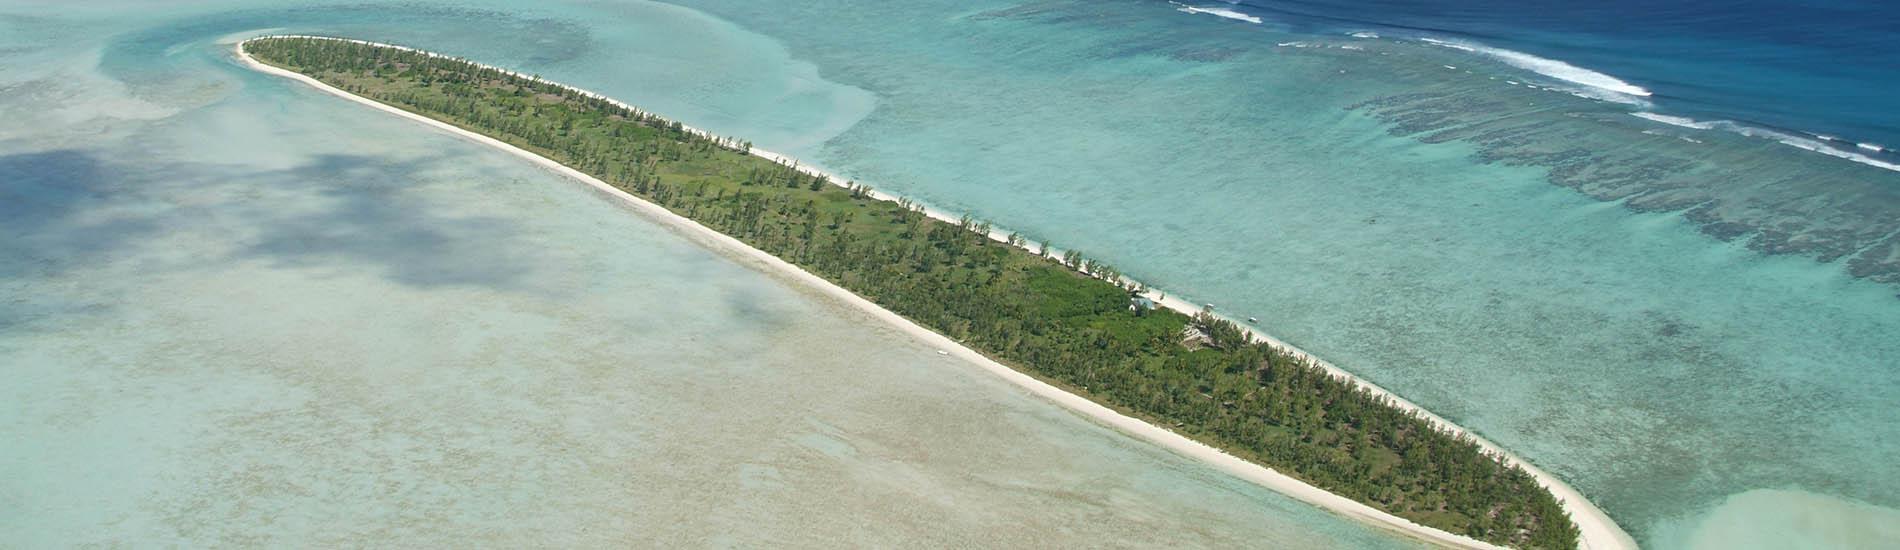 aerial-view-ile-aux-coco-rodrigues